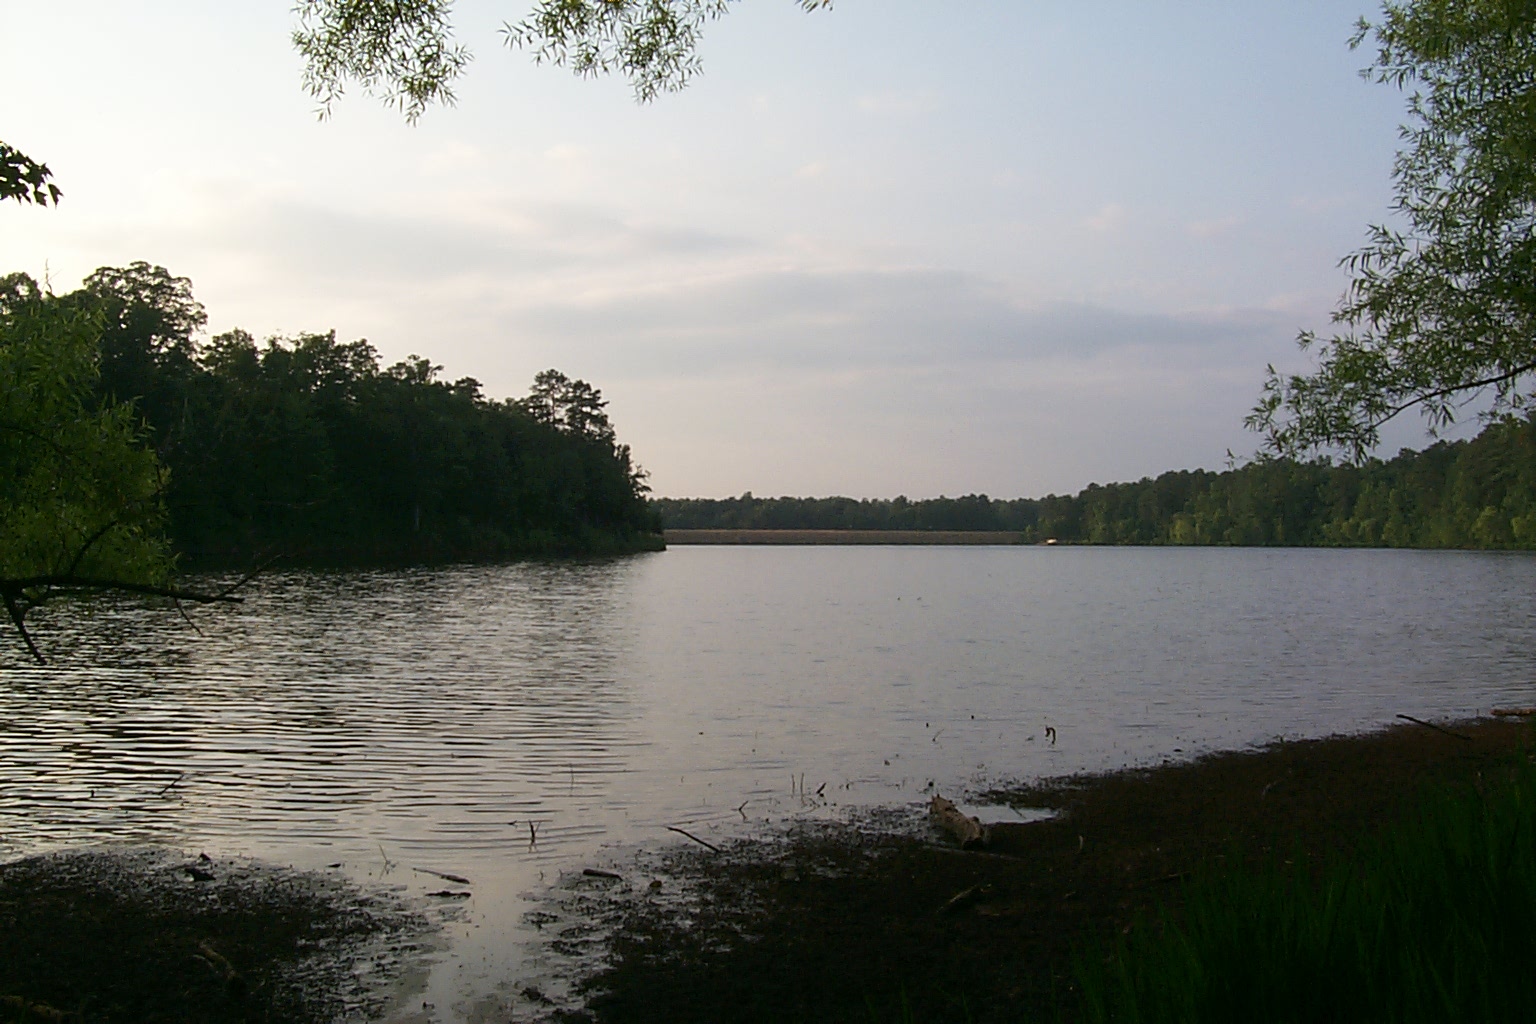 a view of a body of water, surrounded by trees